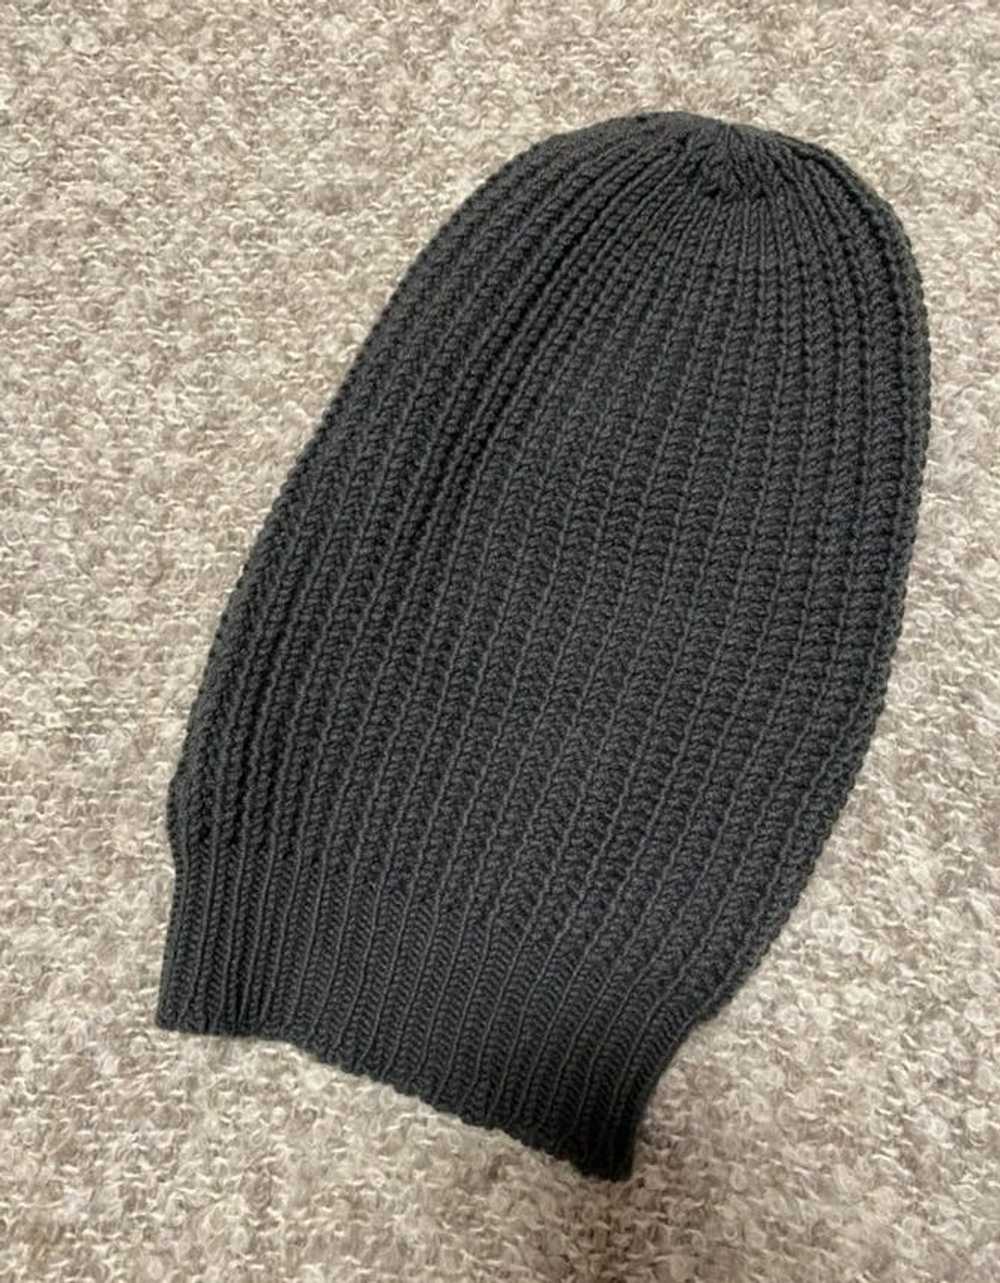 Rick Owens FW14 Moody Wool Knitted Beanie Hat - image 2